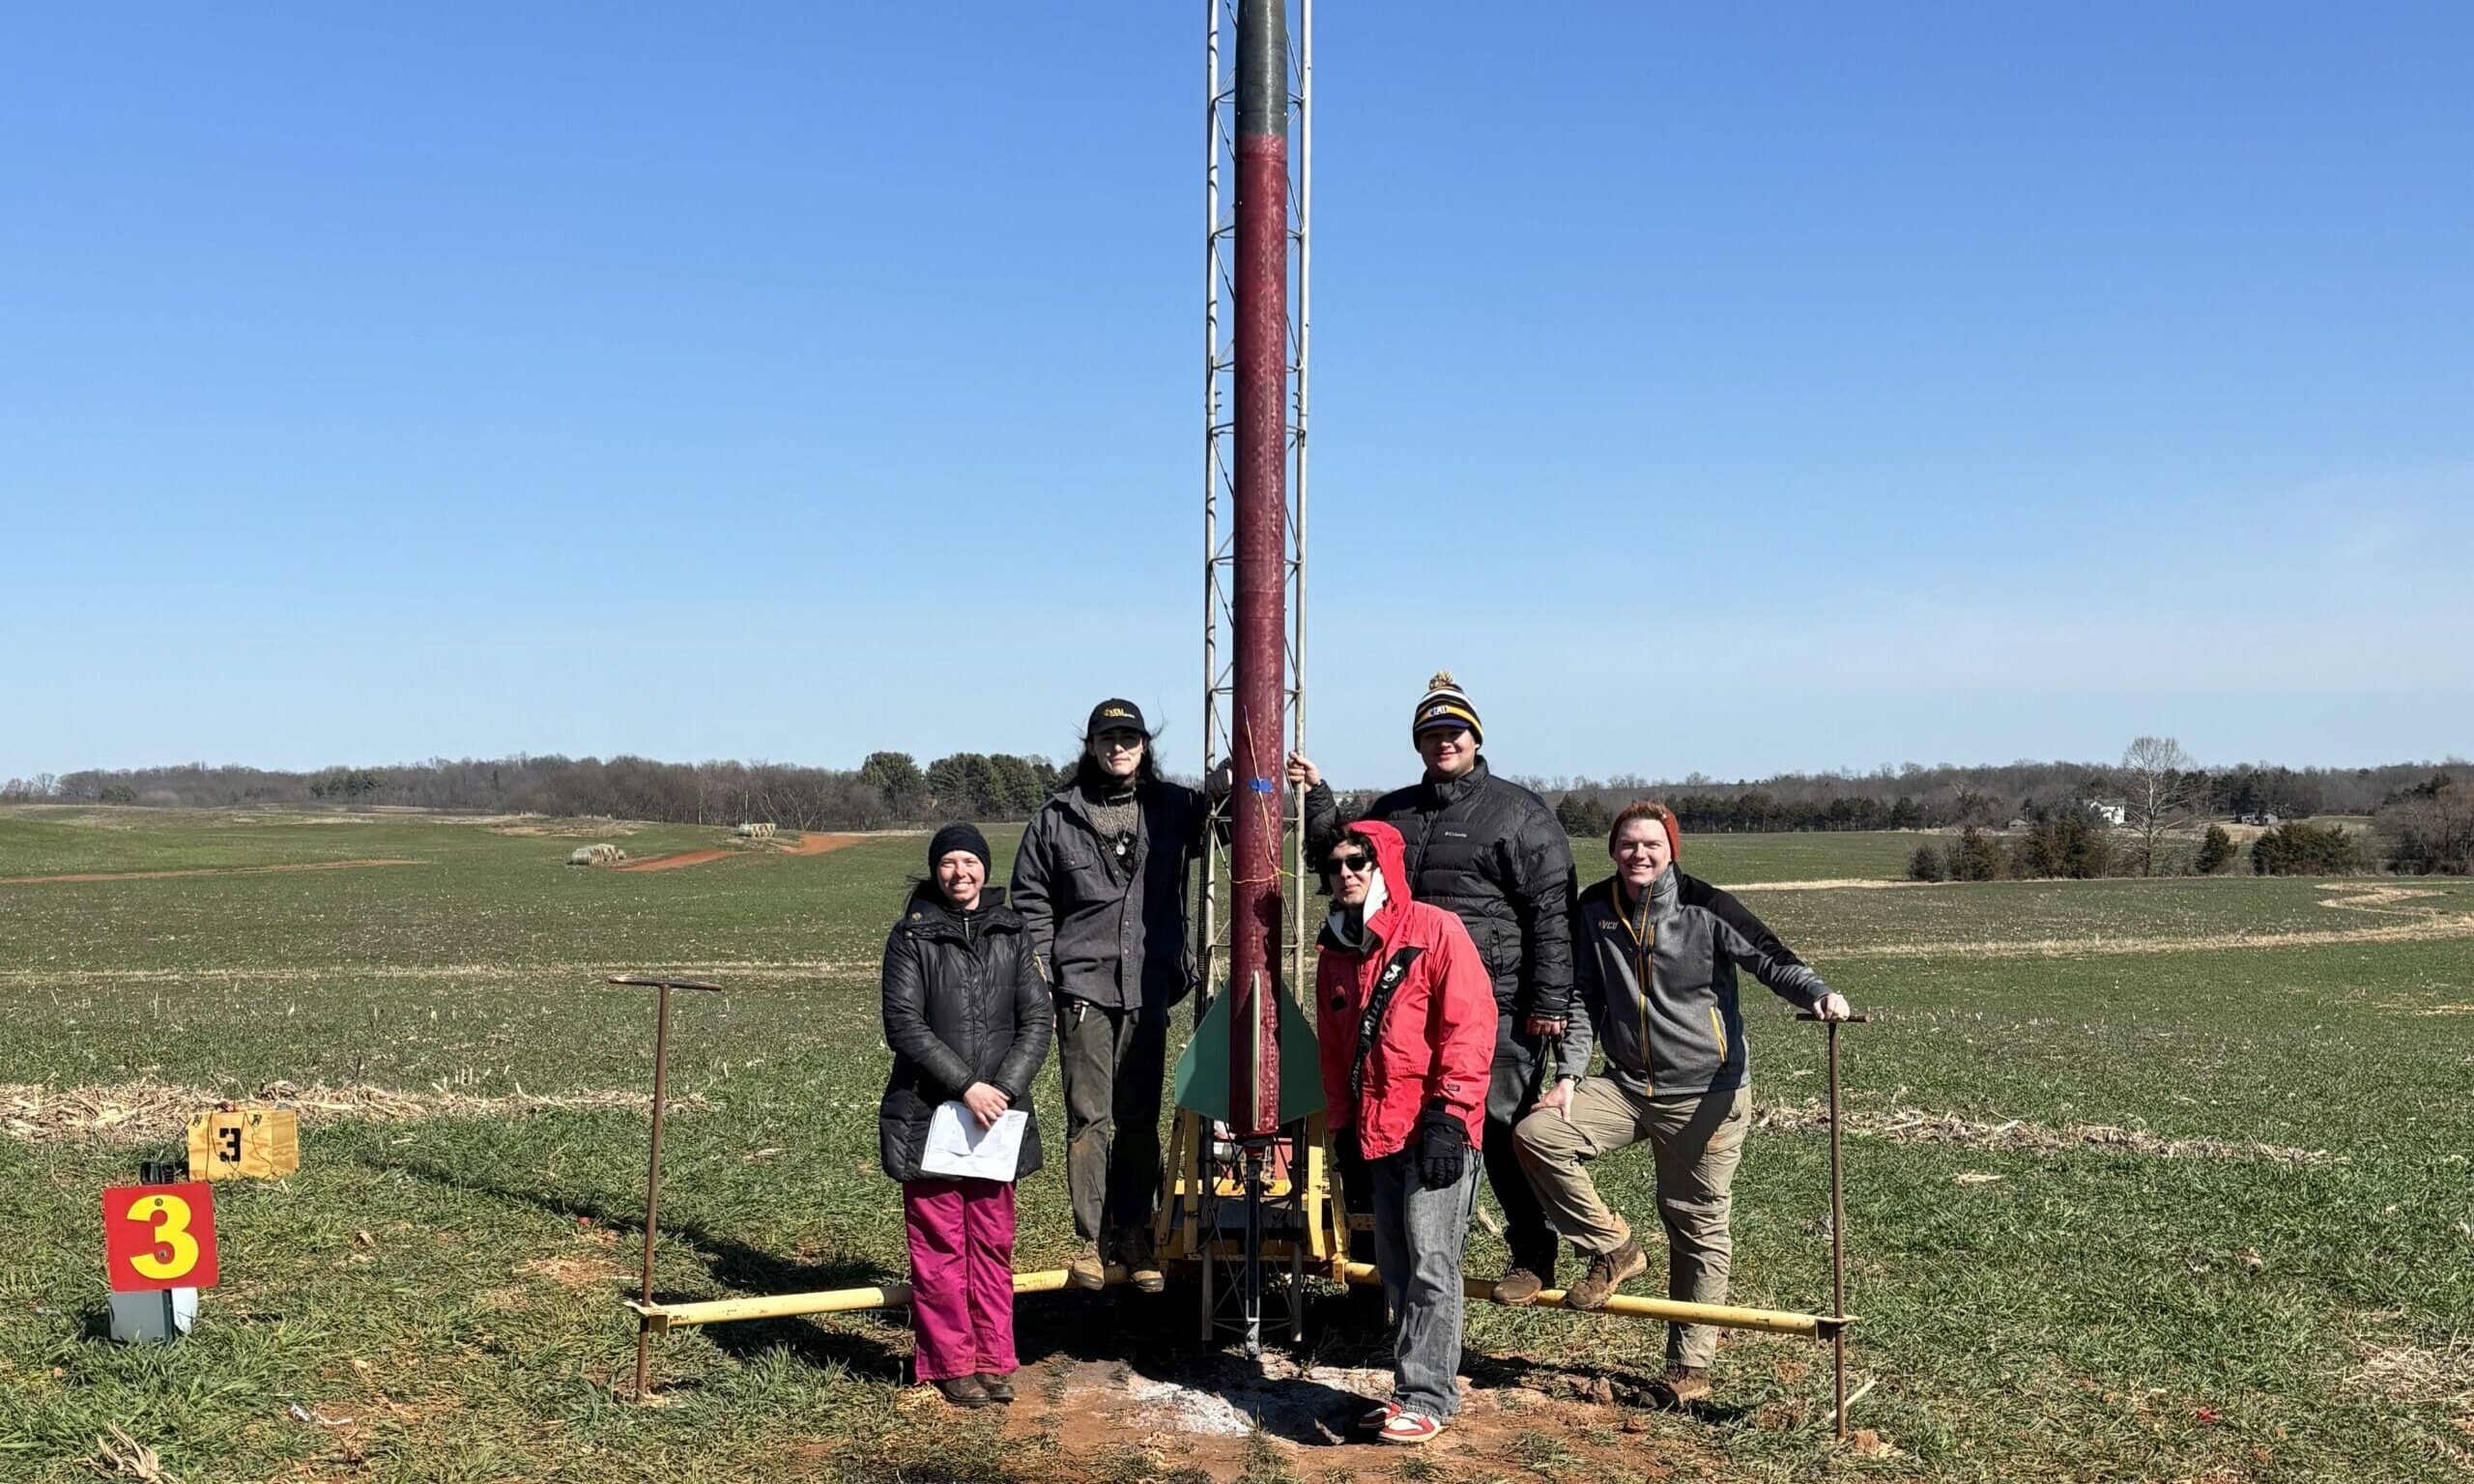 Ram Rocketry students standing next to a large rocket